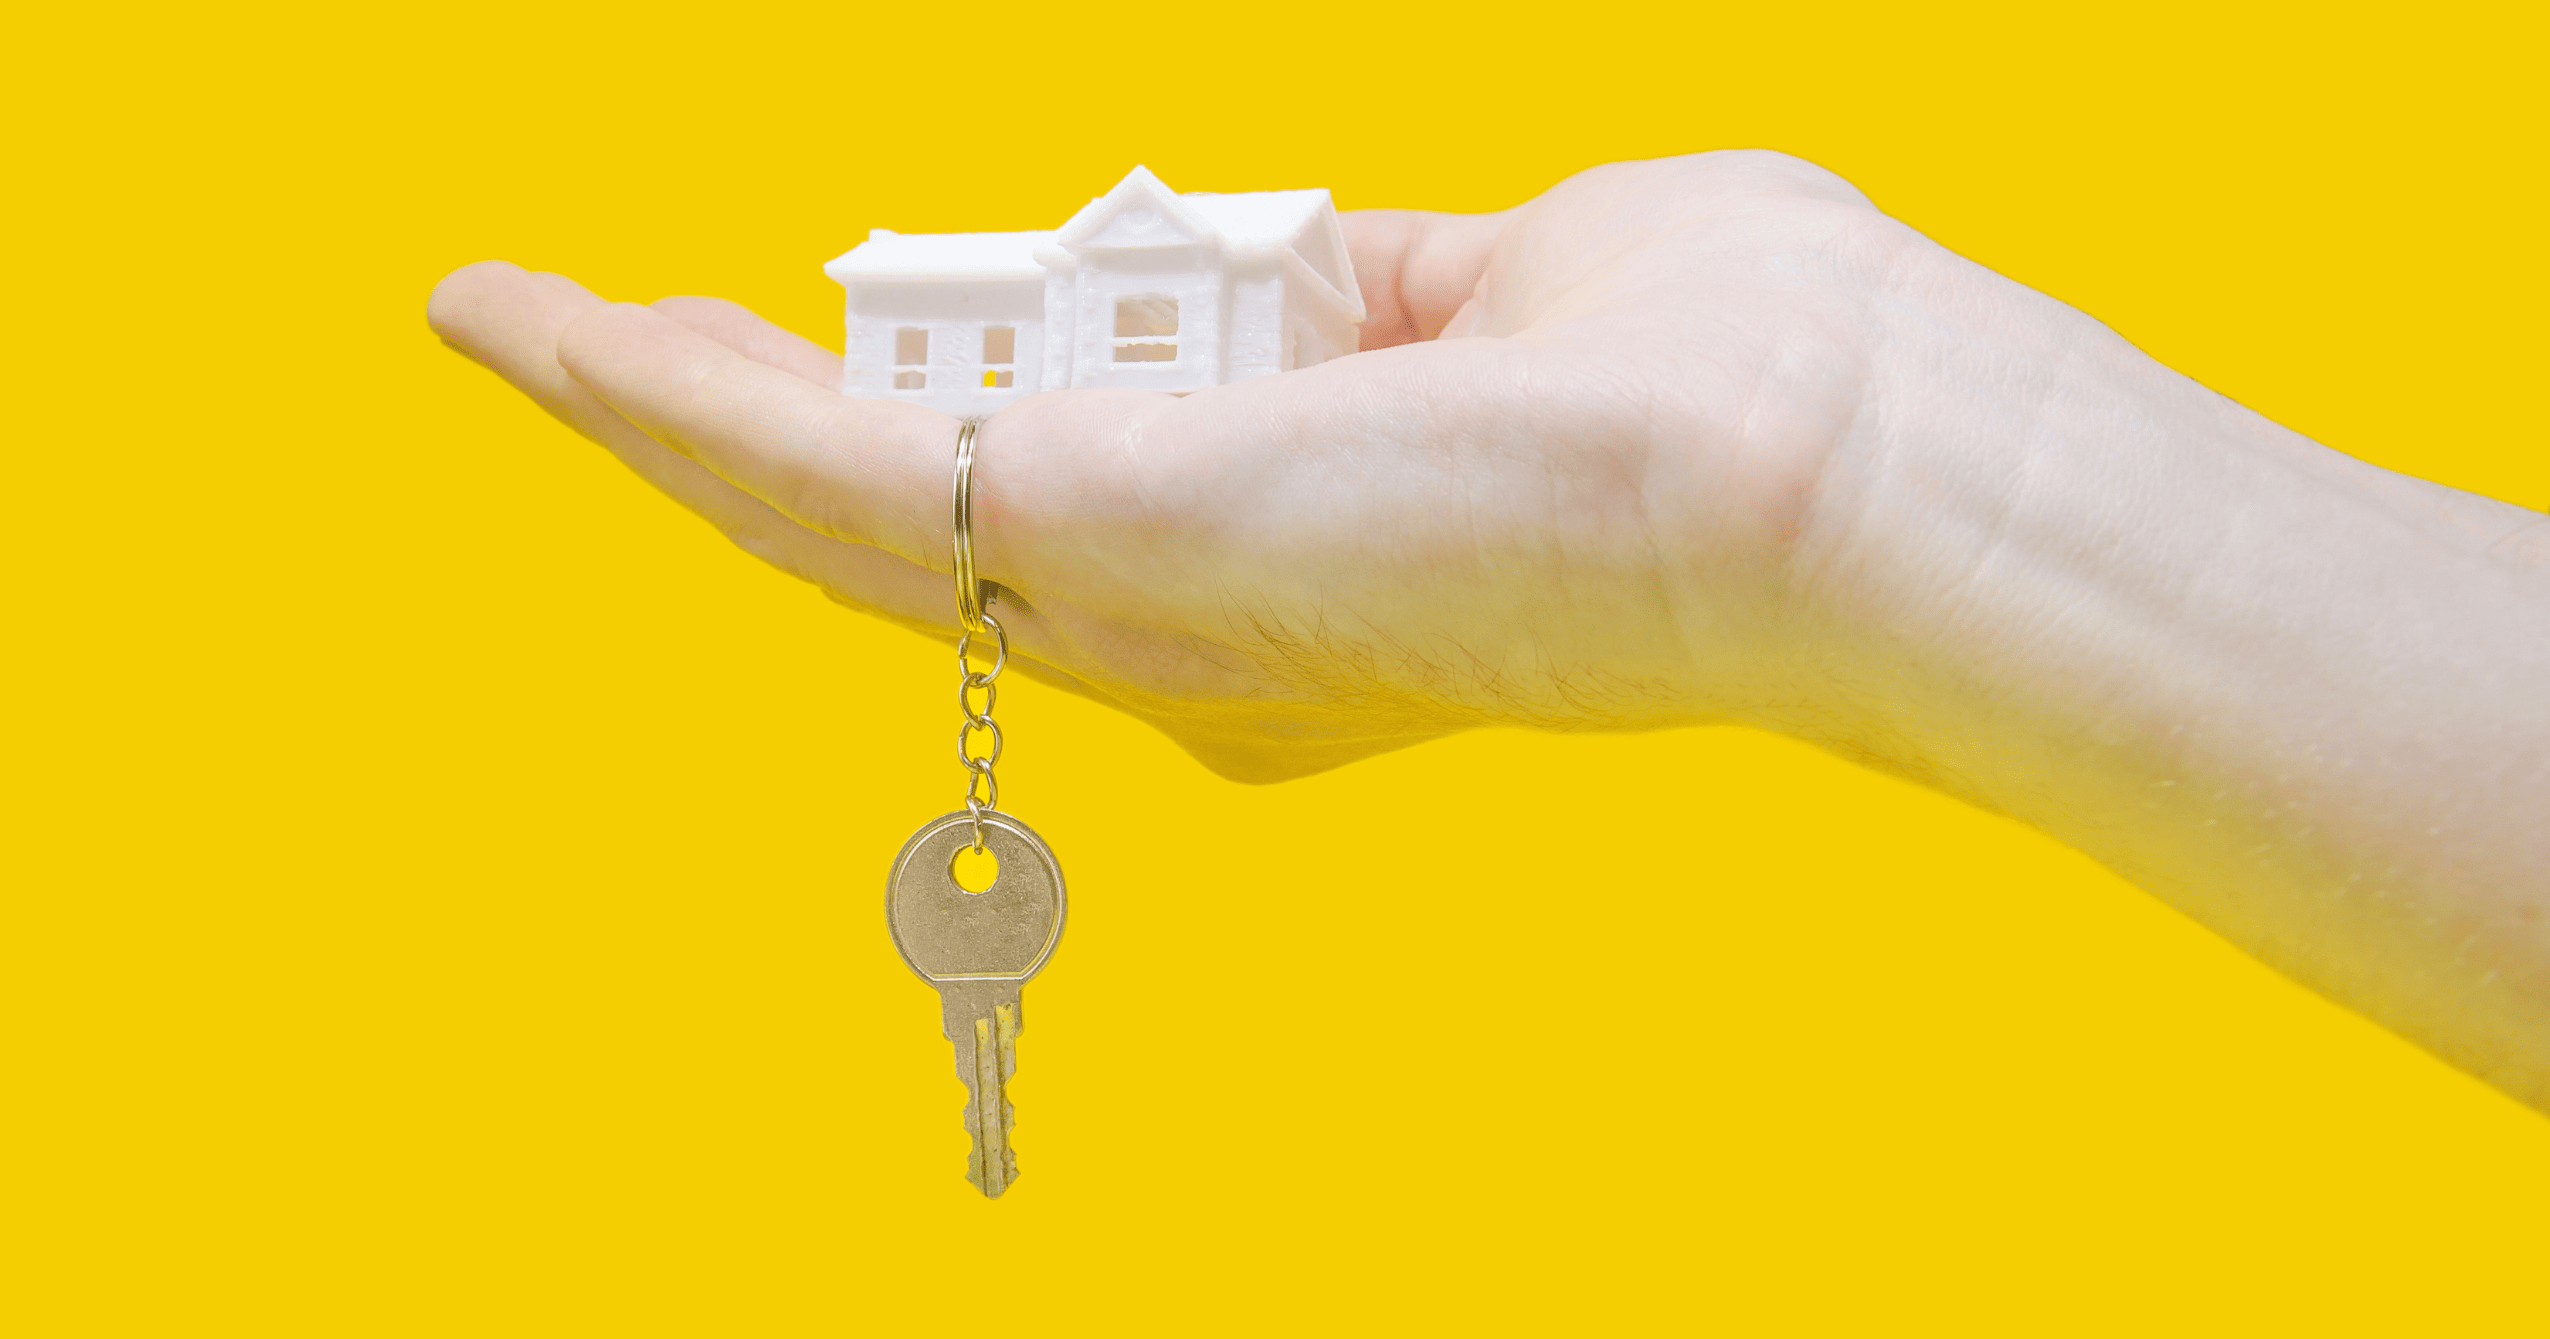 Stock image of a house model and key - find your new home on Share to Buy!